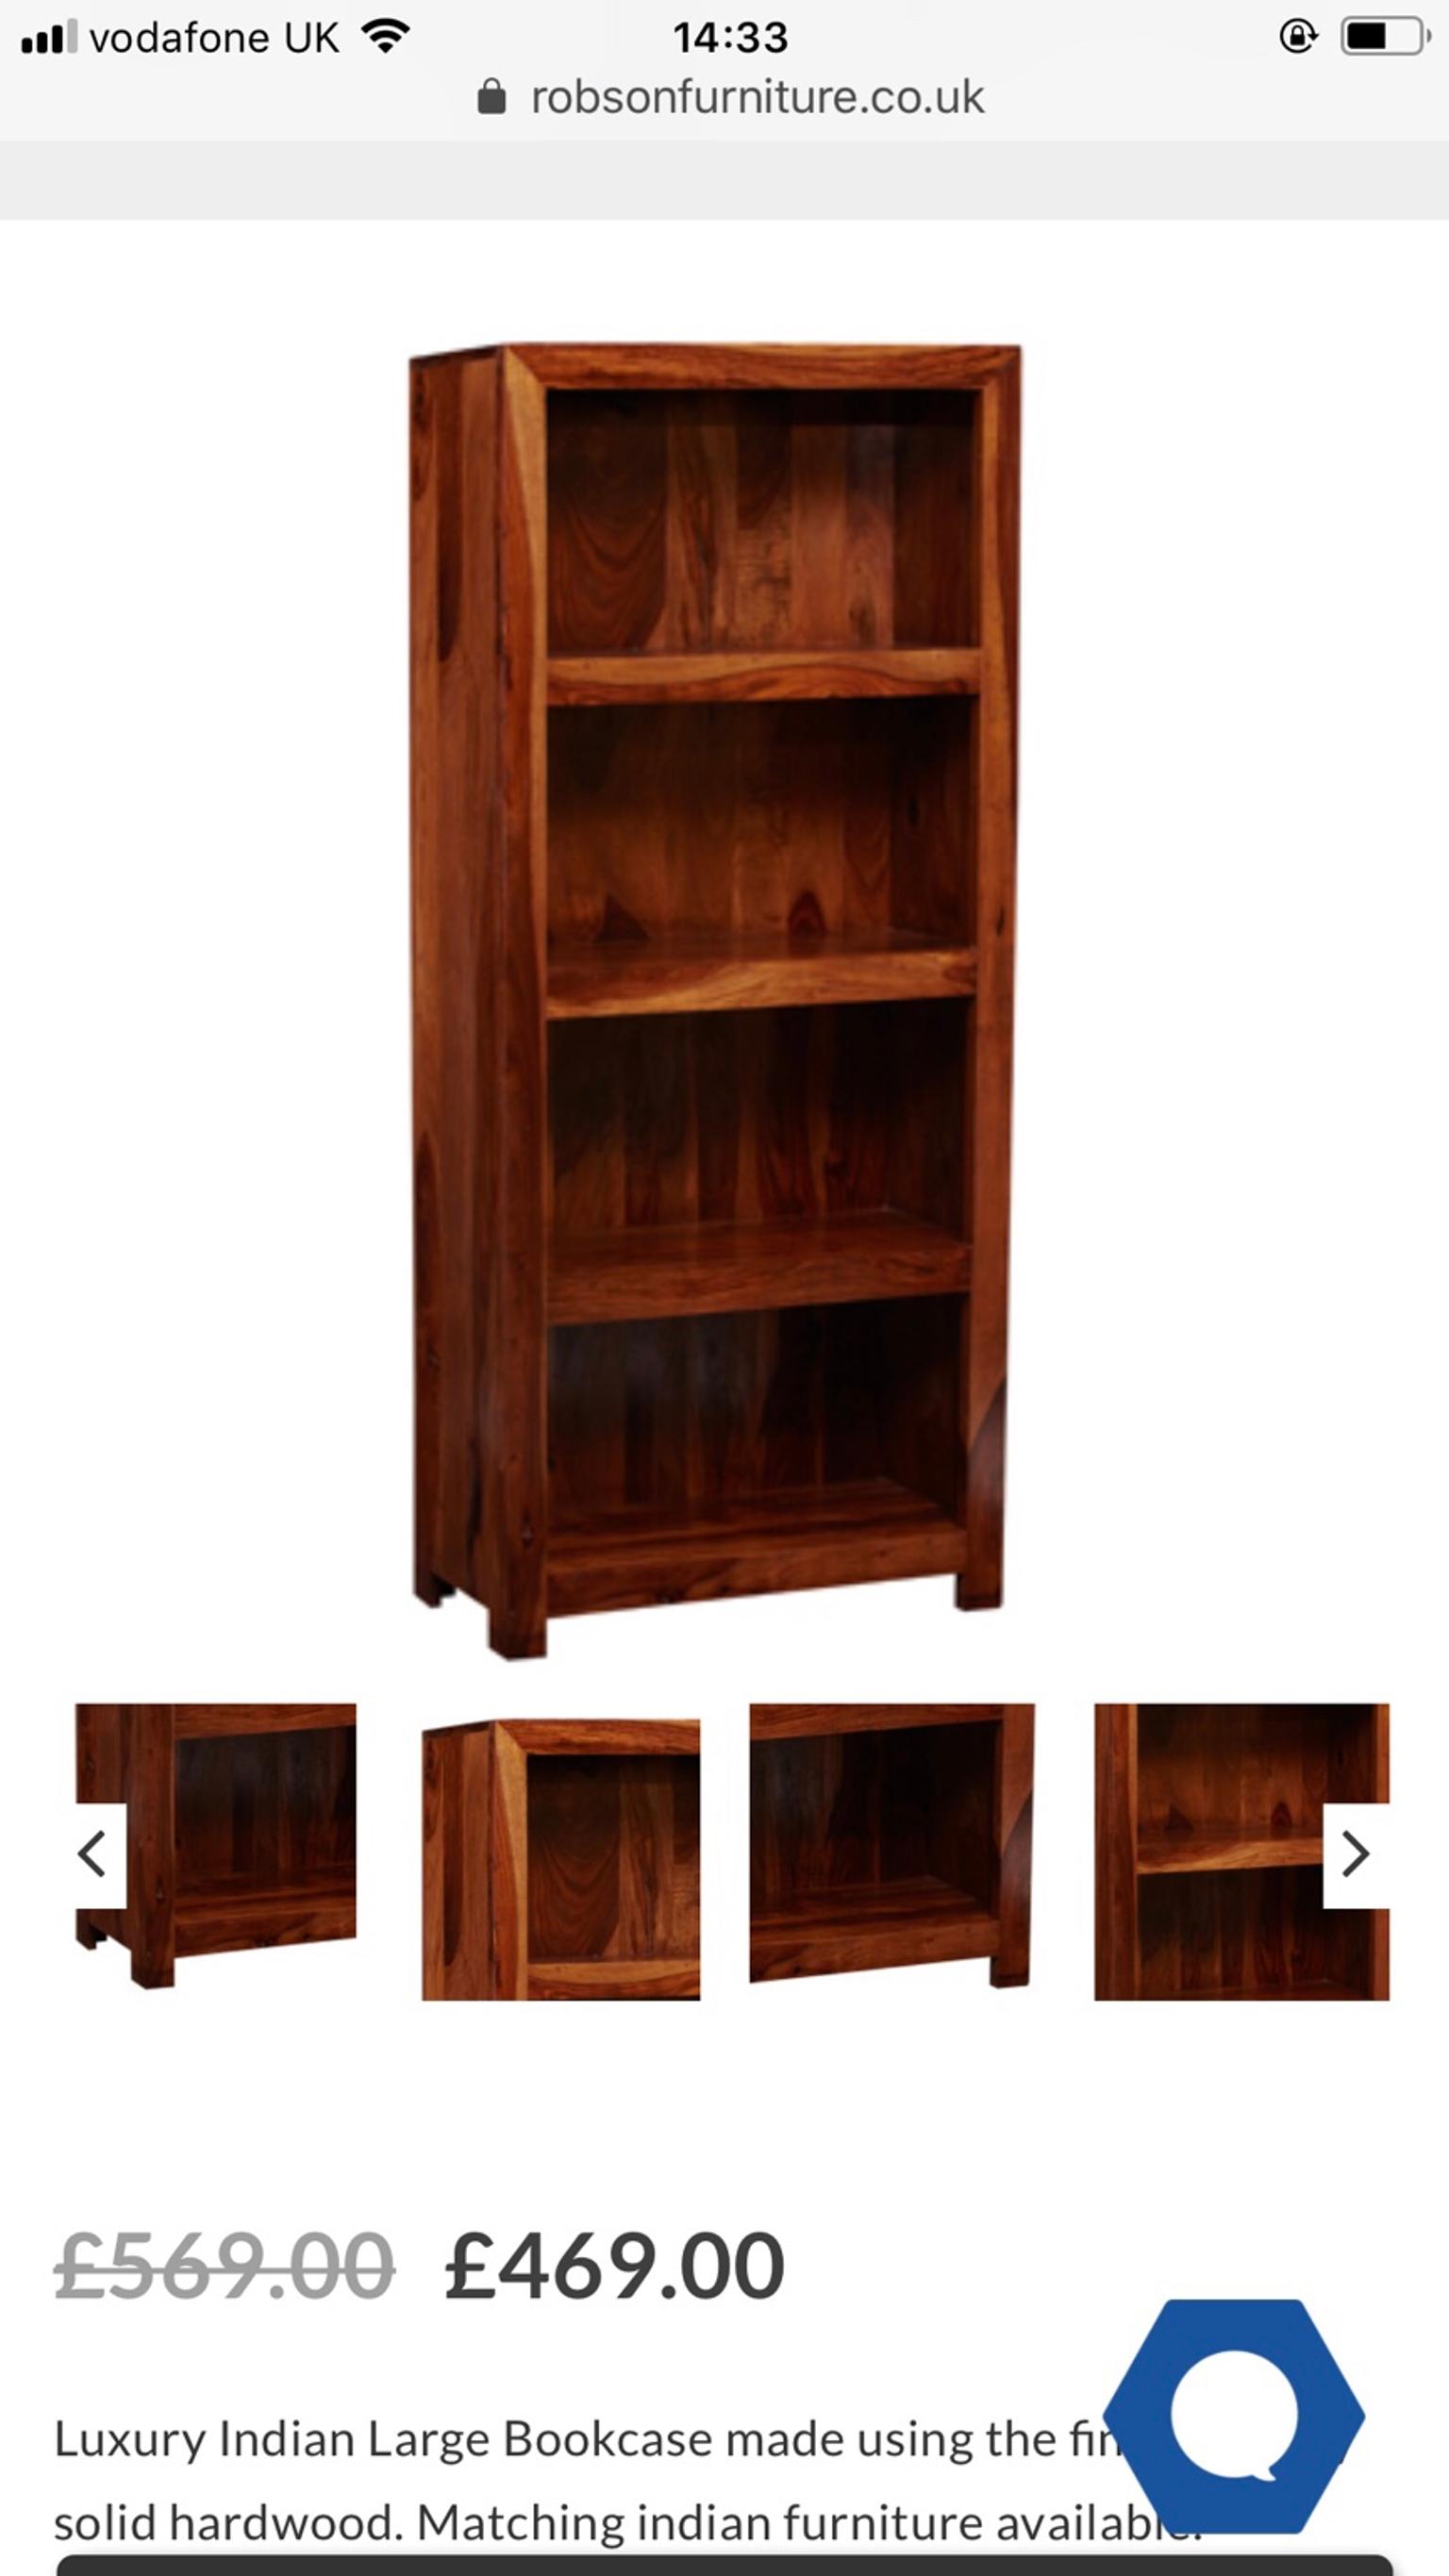 Indian Wood Bookcase In W13 London Borough Of Ealing For 80 00